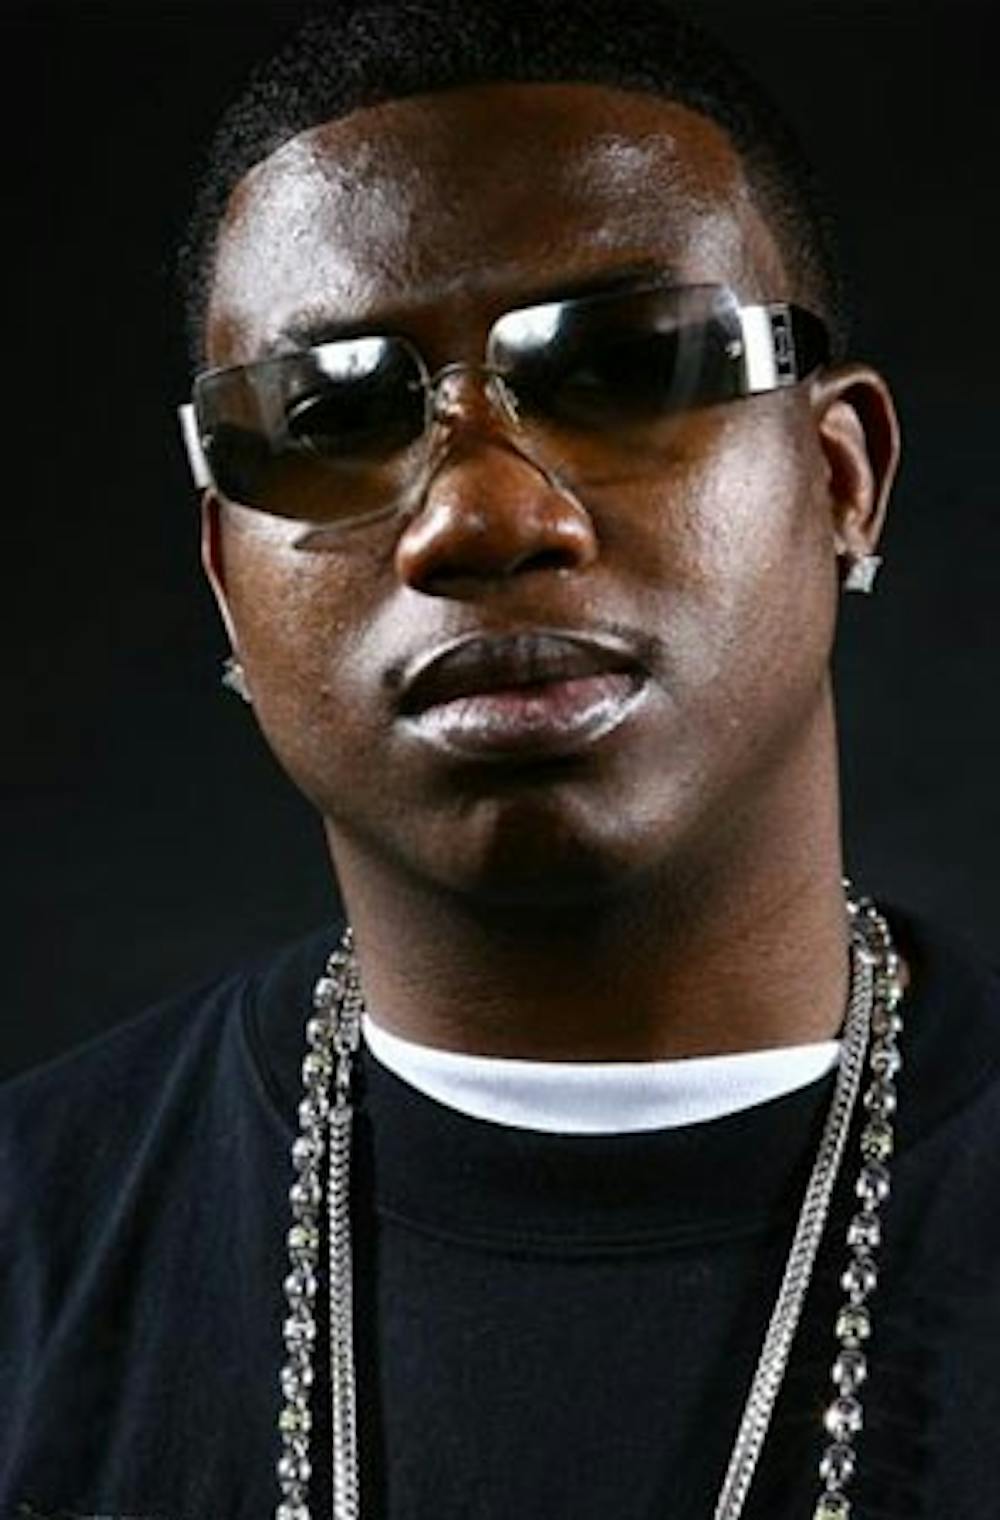 Rapper Gucci Mane is said to have ties to the Bloods and Crips gangs.